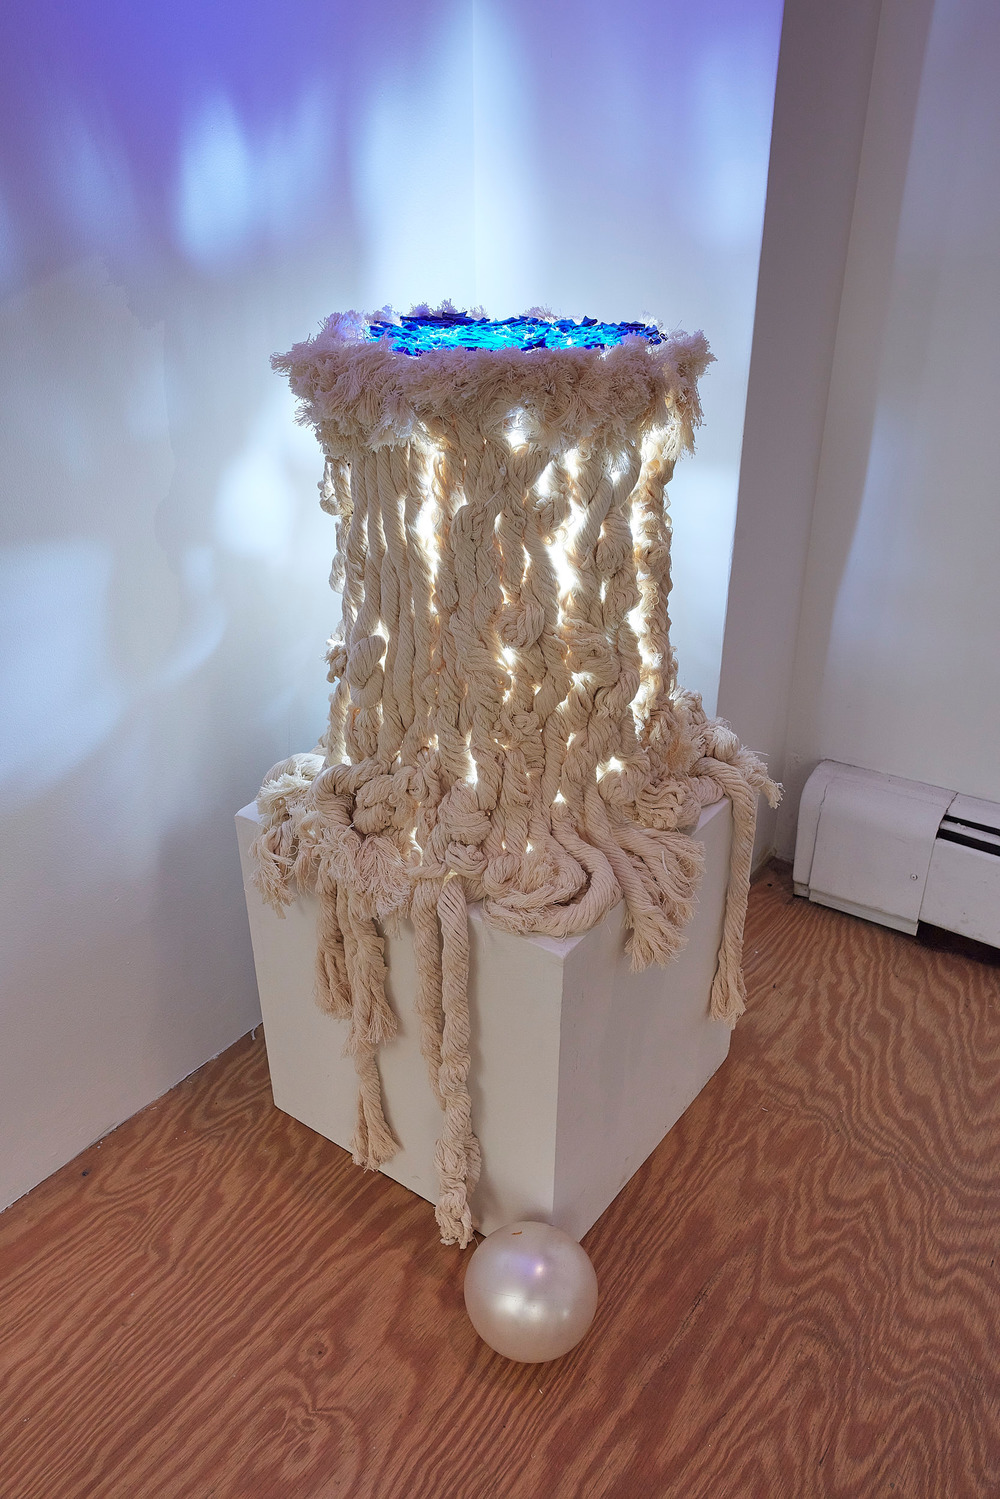  2022  re-used cotton rope, found glass from water bottles, found light, balsa wood, found child’s ball, velcro, pedestal